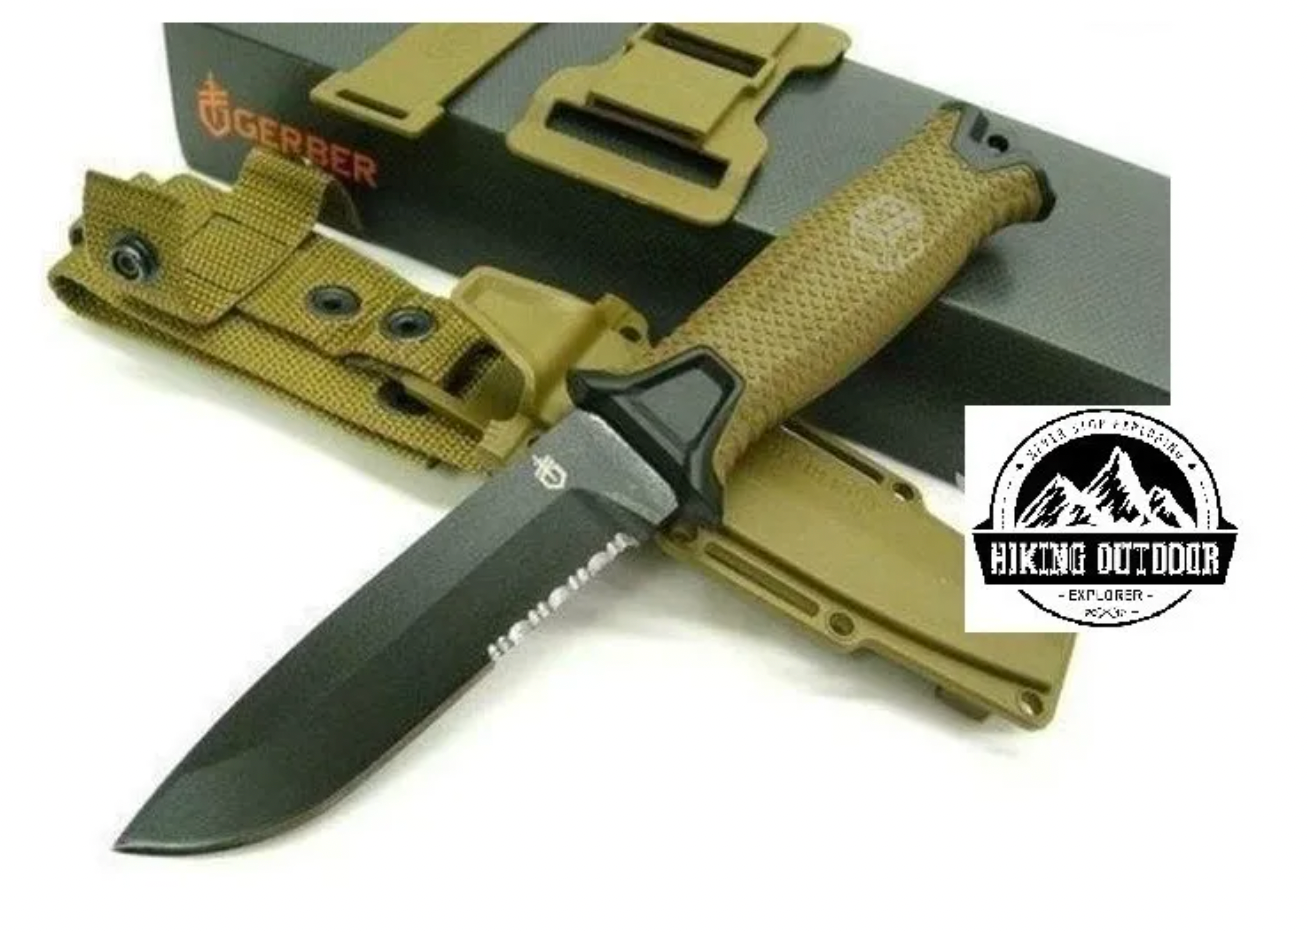 Cuchillo Gerber - Strongarm -Tactico Militar - hiking outdoor Chile